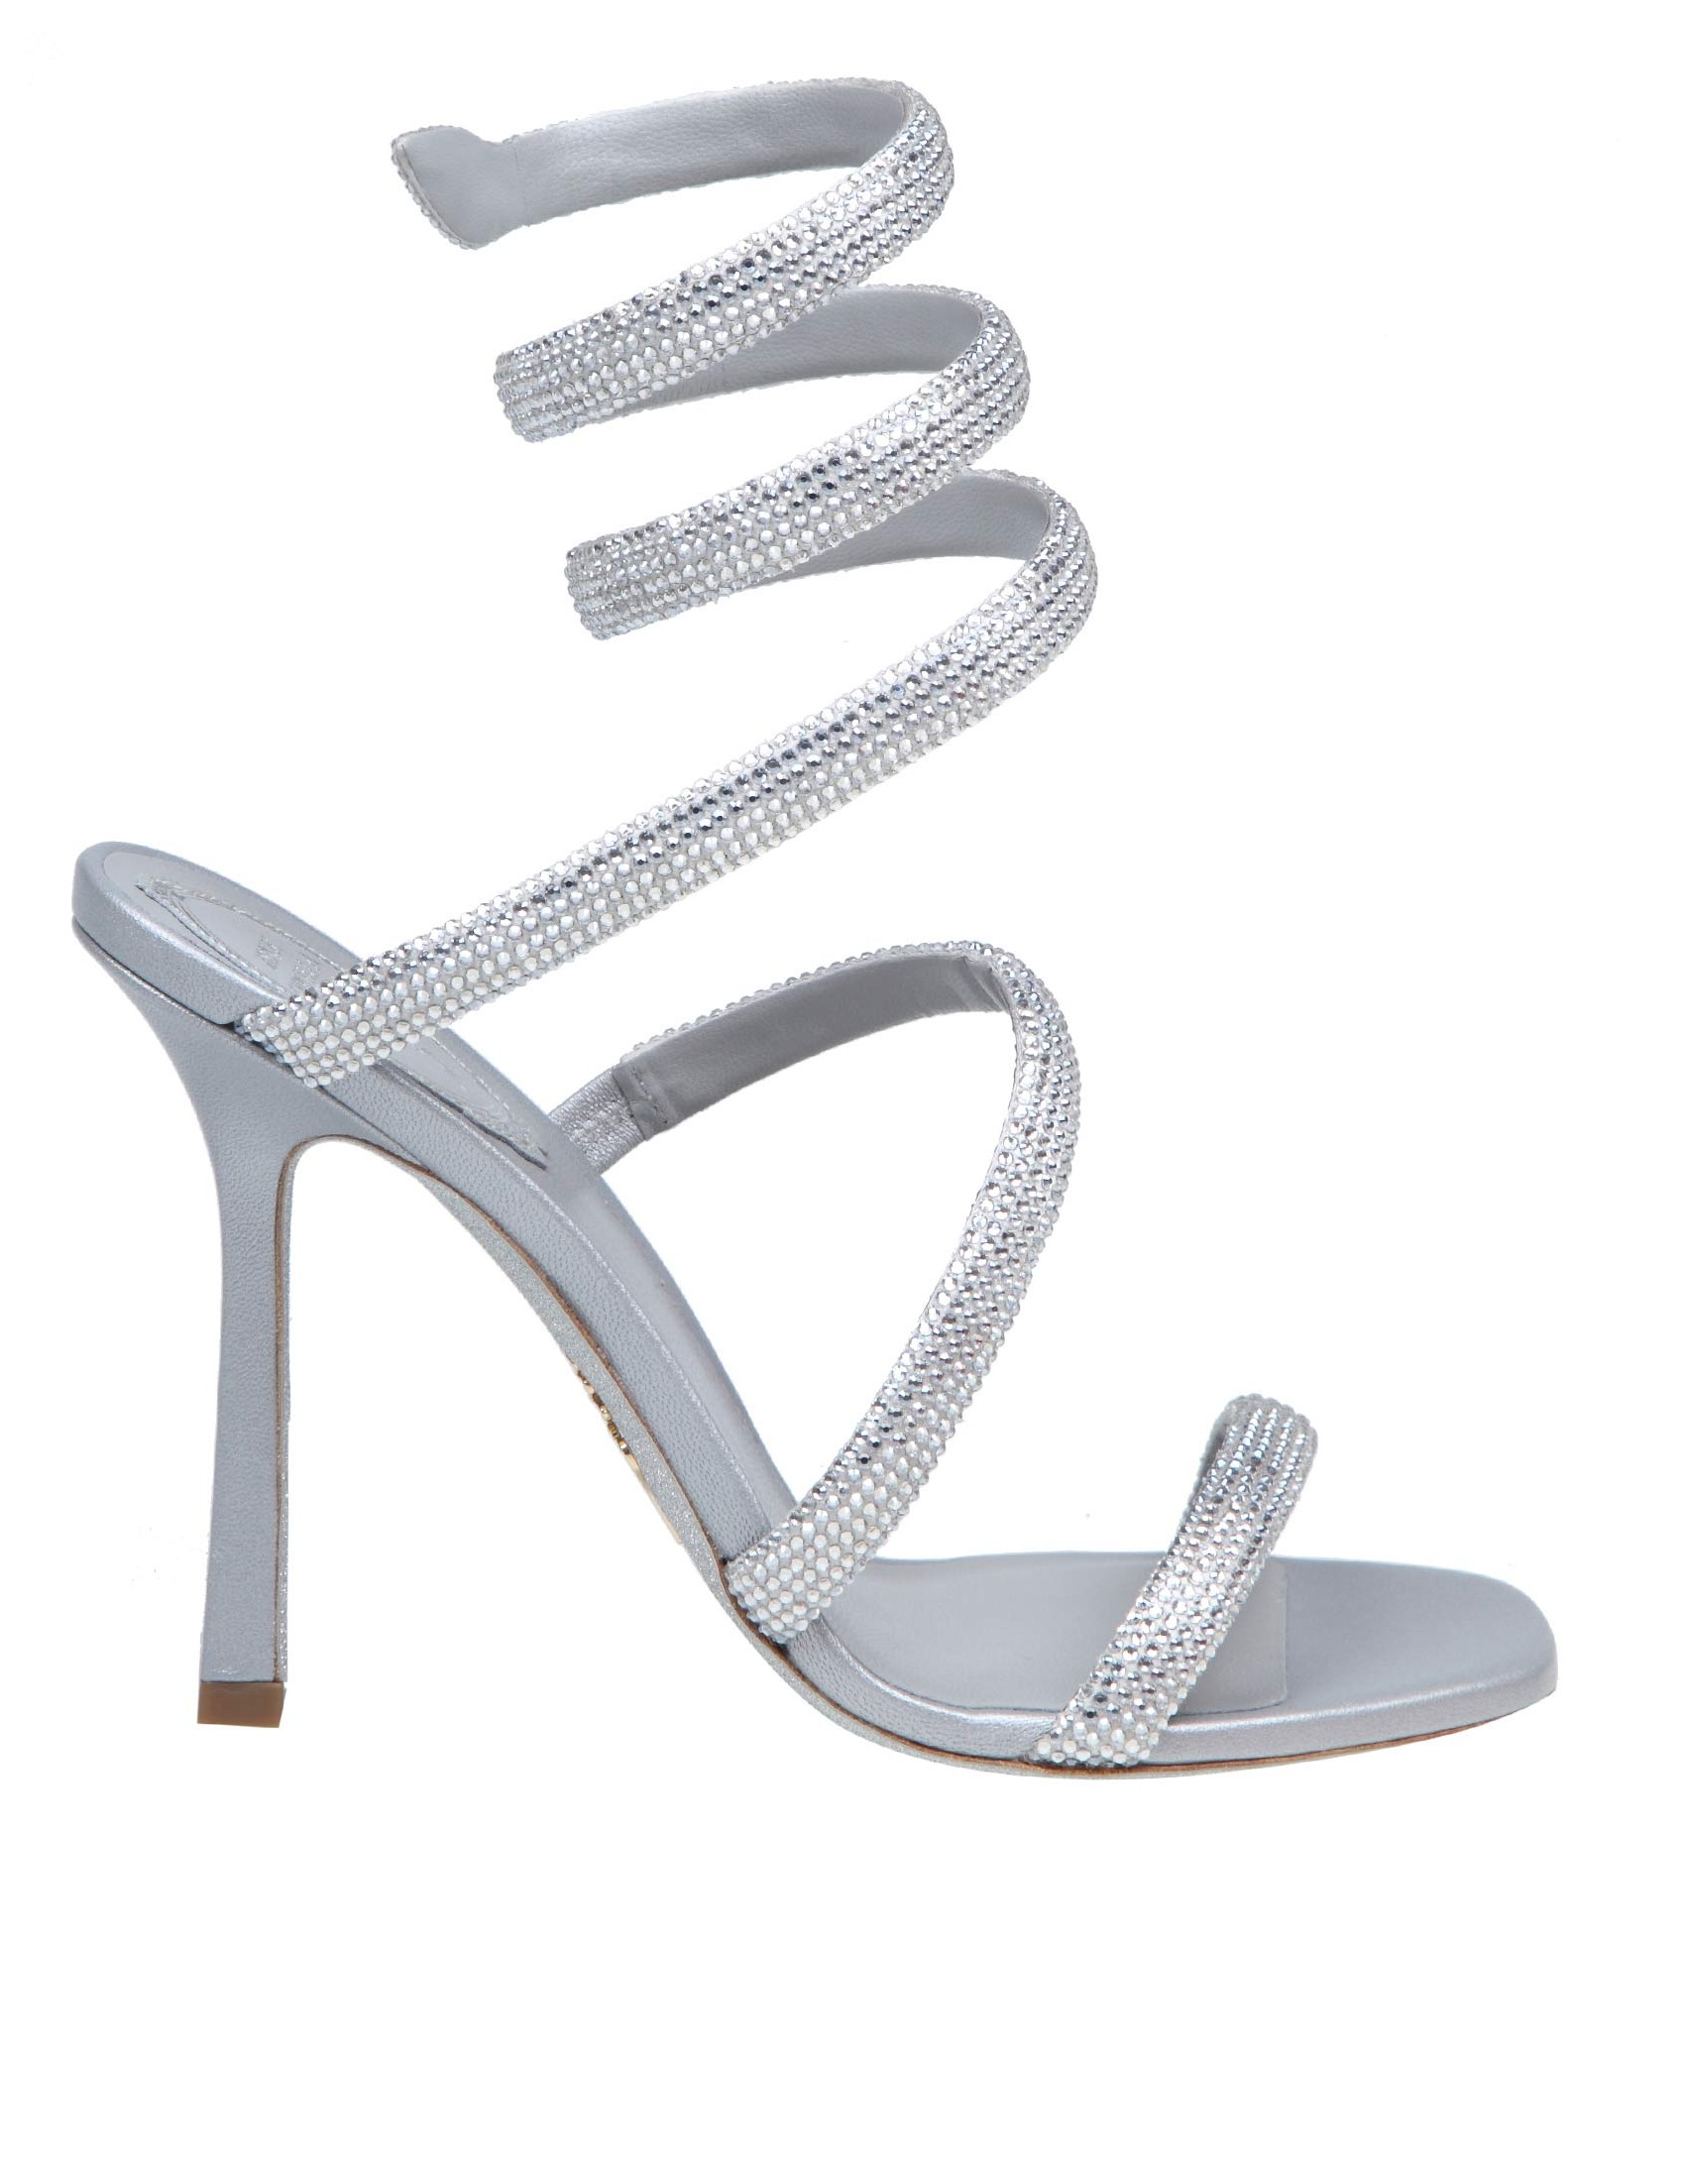 RENE CAOVILLA CLEO SANDAL IN SATIN WITH MICRO CRYSTALS